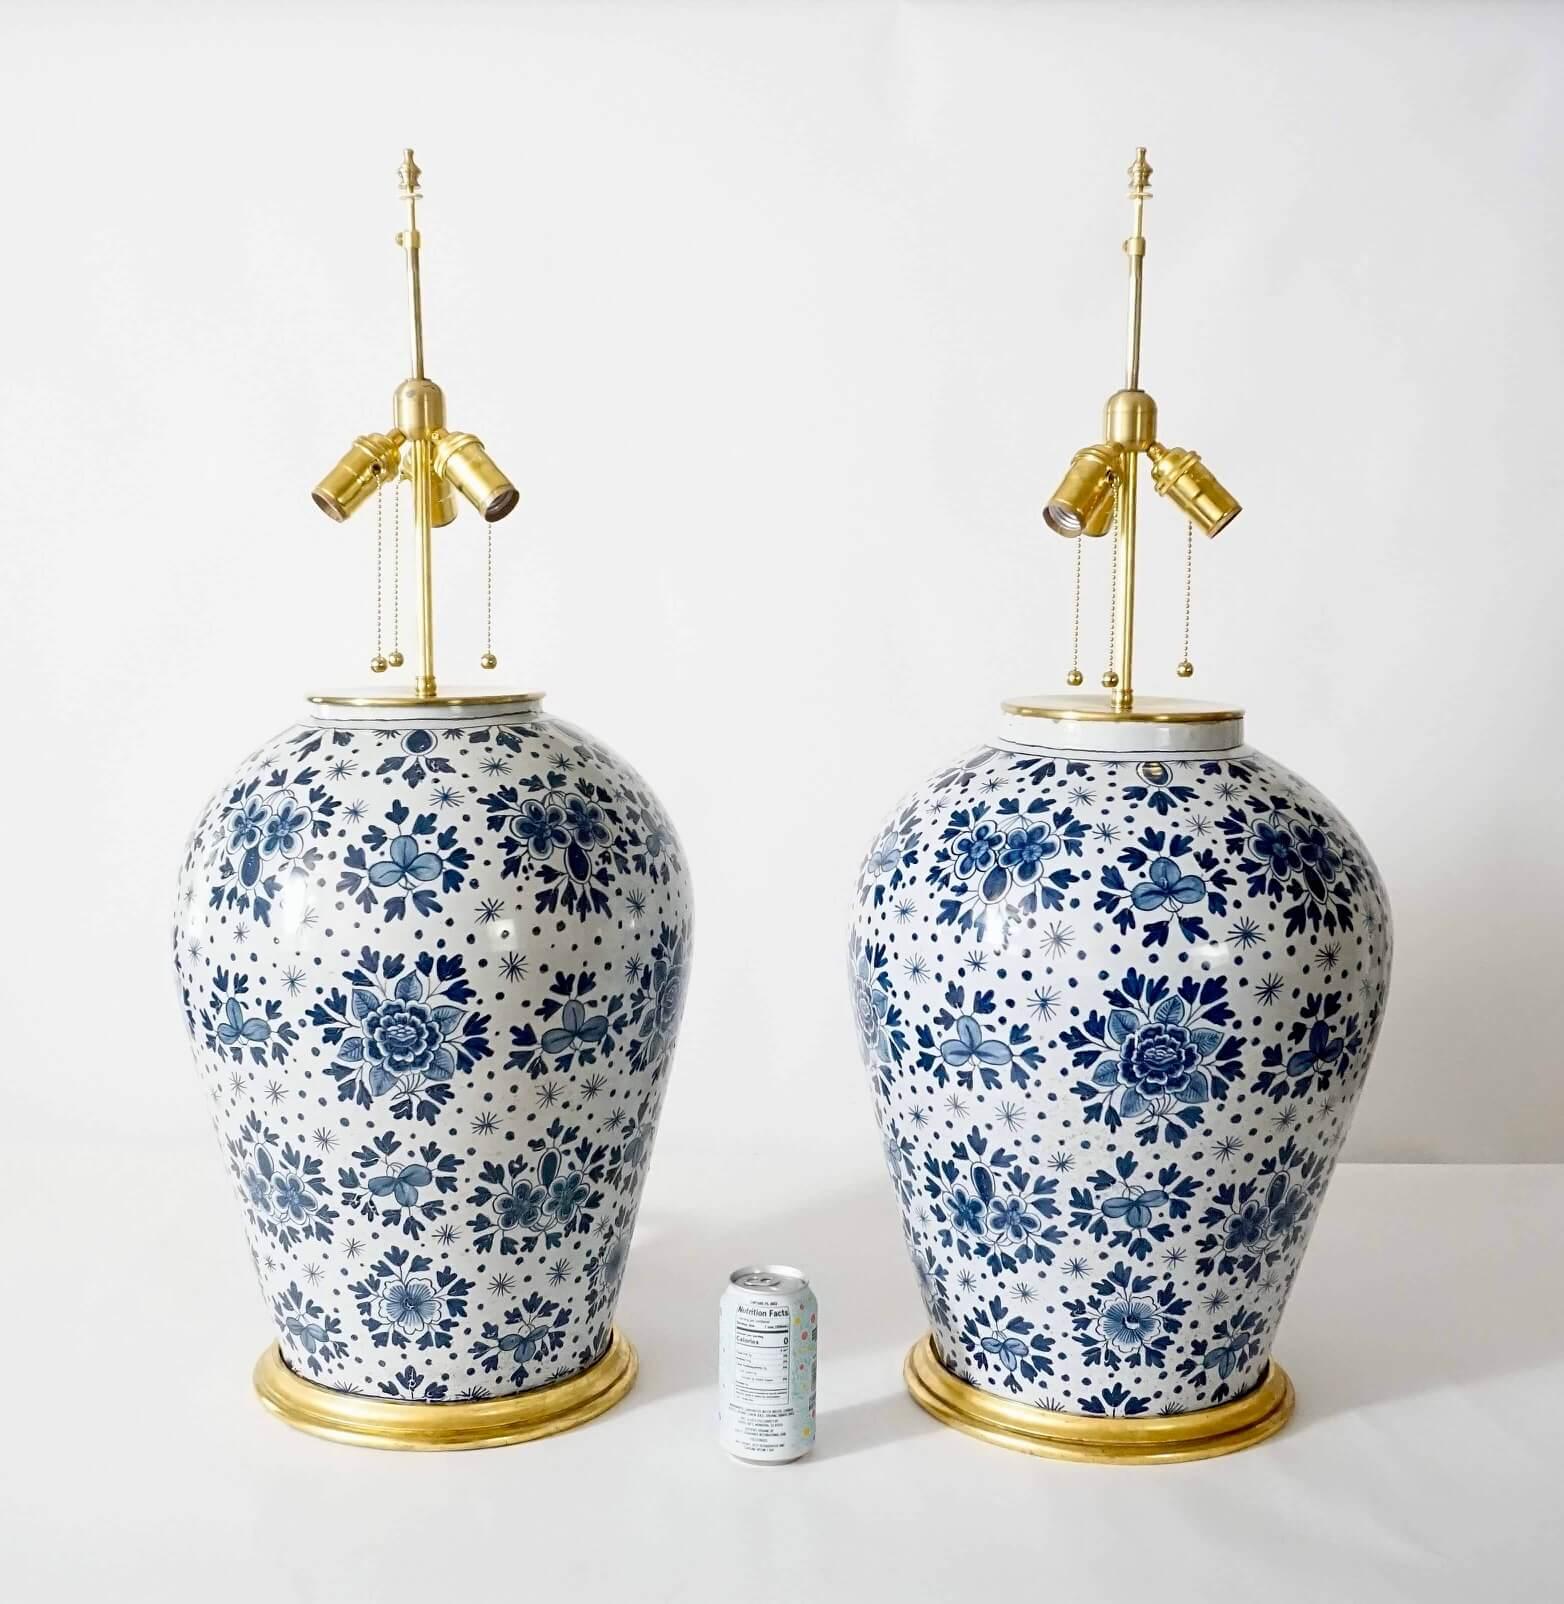 Pair of Large Scale Blue and White Dutch Delft Vase Table Lamps, circa 1850 For Sale 7